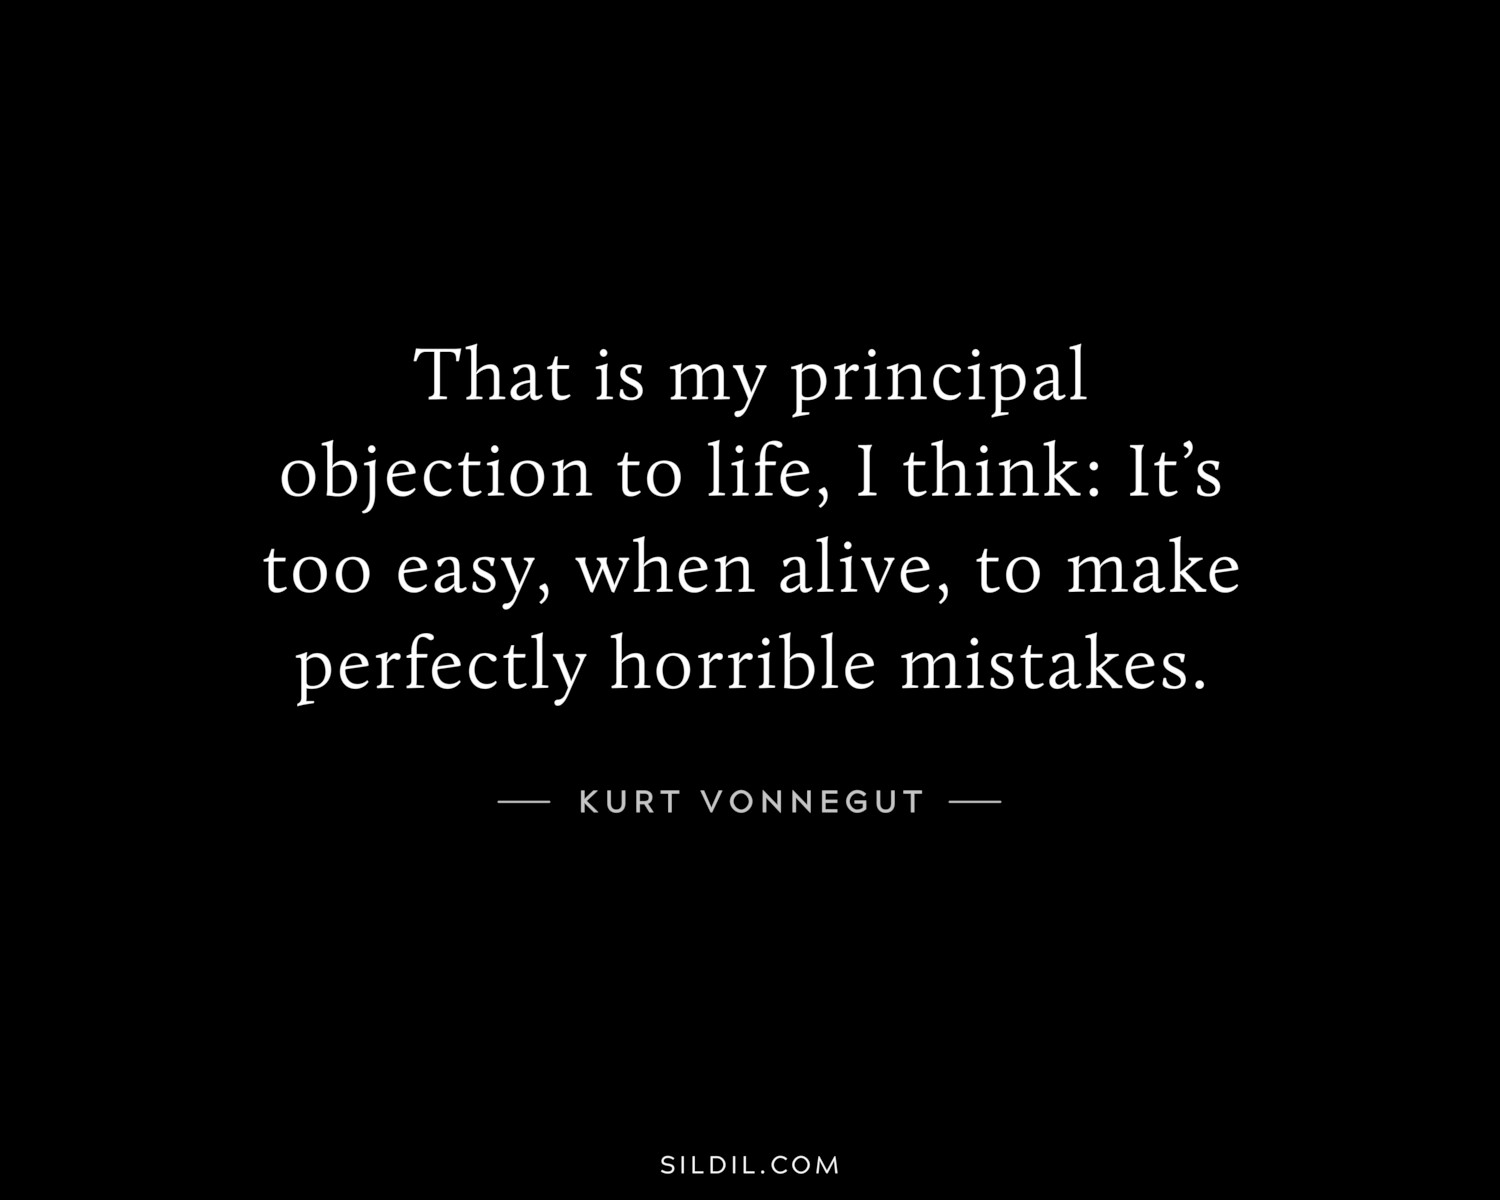 That is my principal objection to life, I think: It’s too easy, when alive, to make perfectly horrible mistakes.